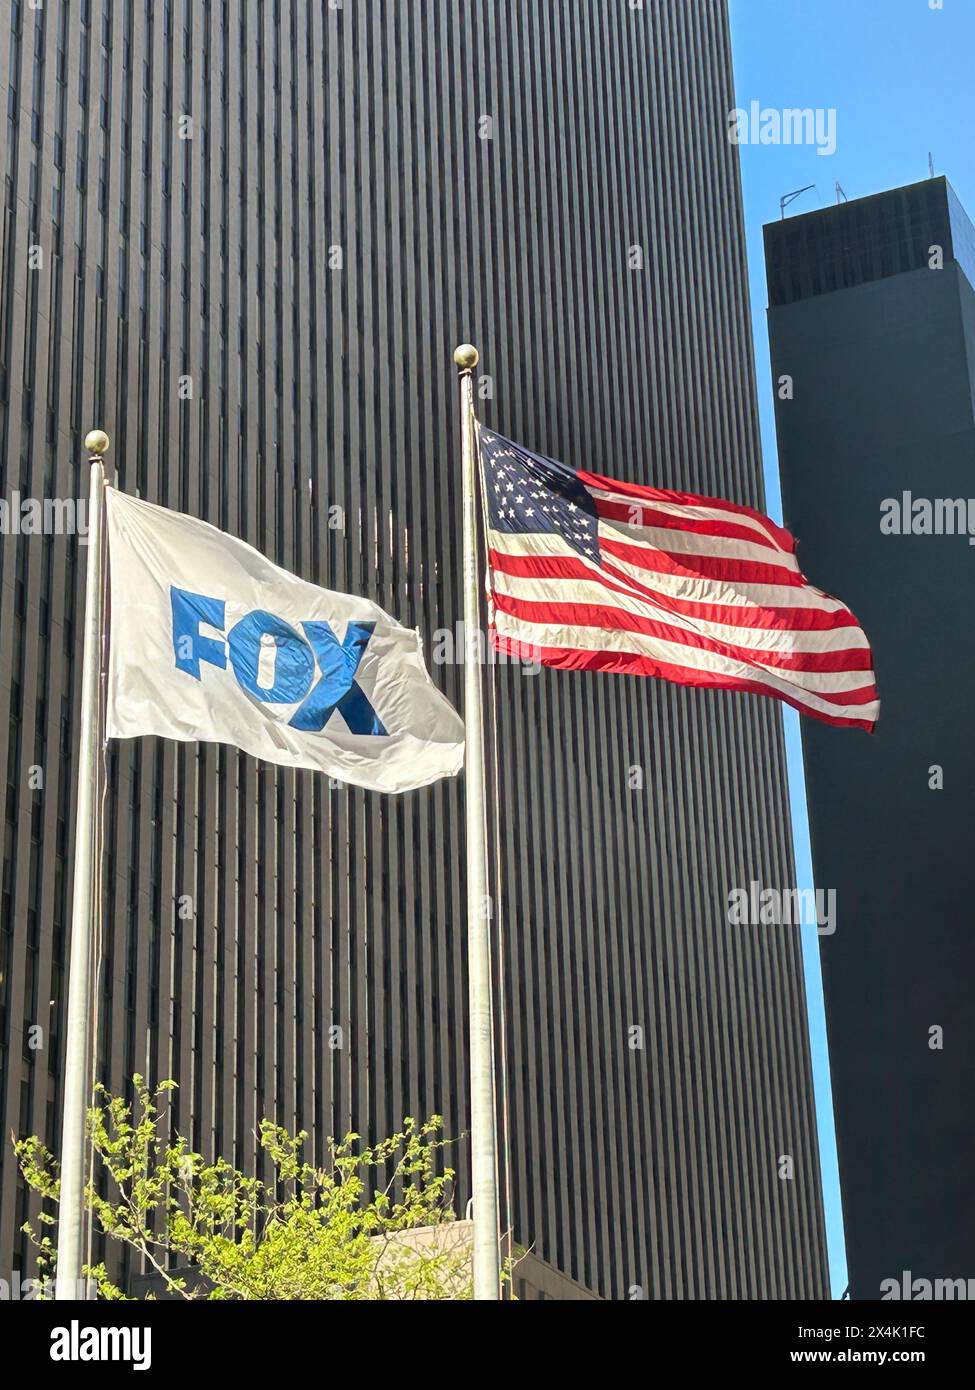 Fox News and American flags flying outside News Corp Building, Avenue of the Americas, New York City, New York, USA Stock Photo